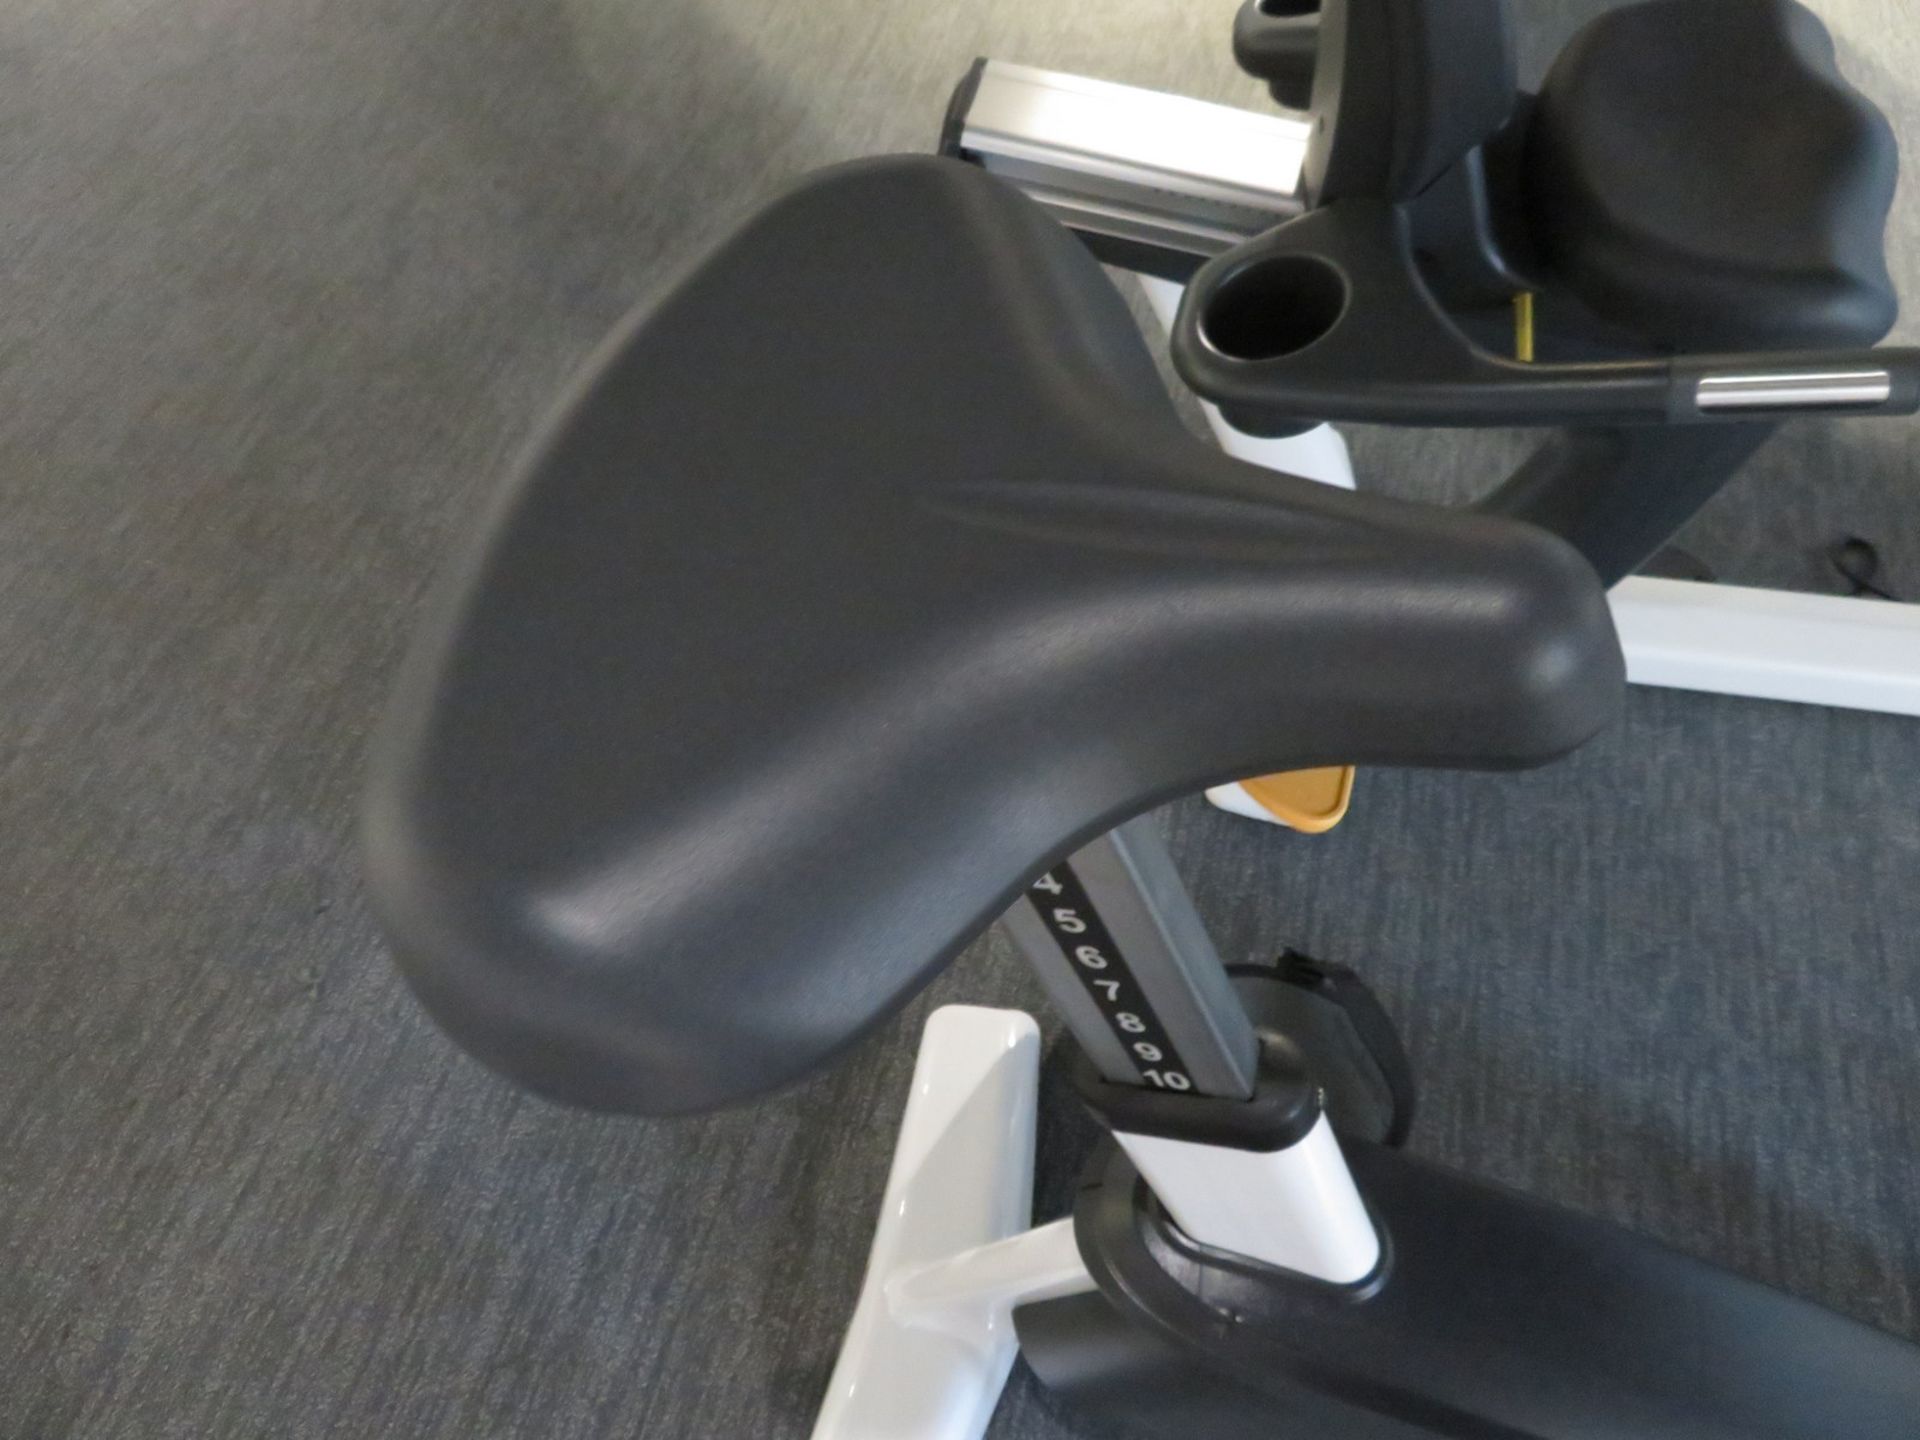 Cybex Upright Bike Model:770C, Working Condition With TV Display Monitor. - Image 4 of 6